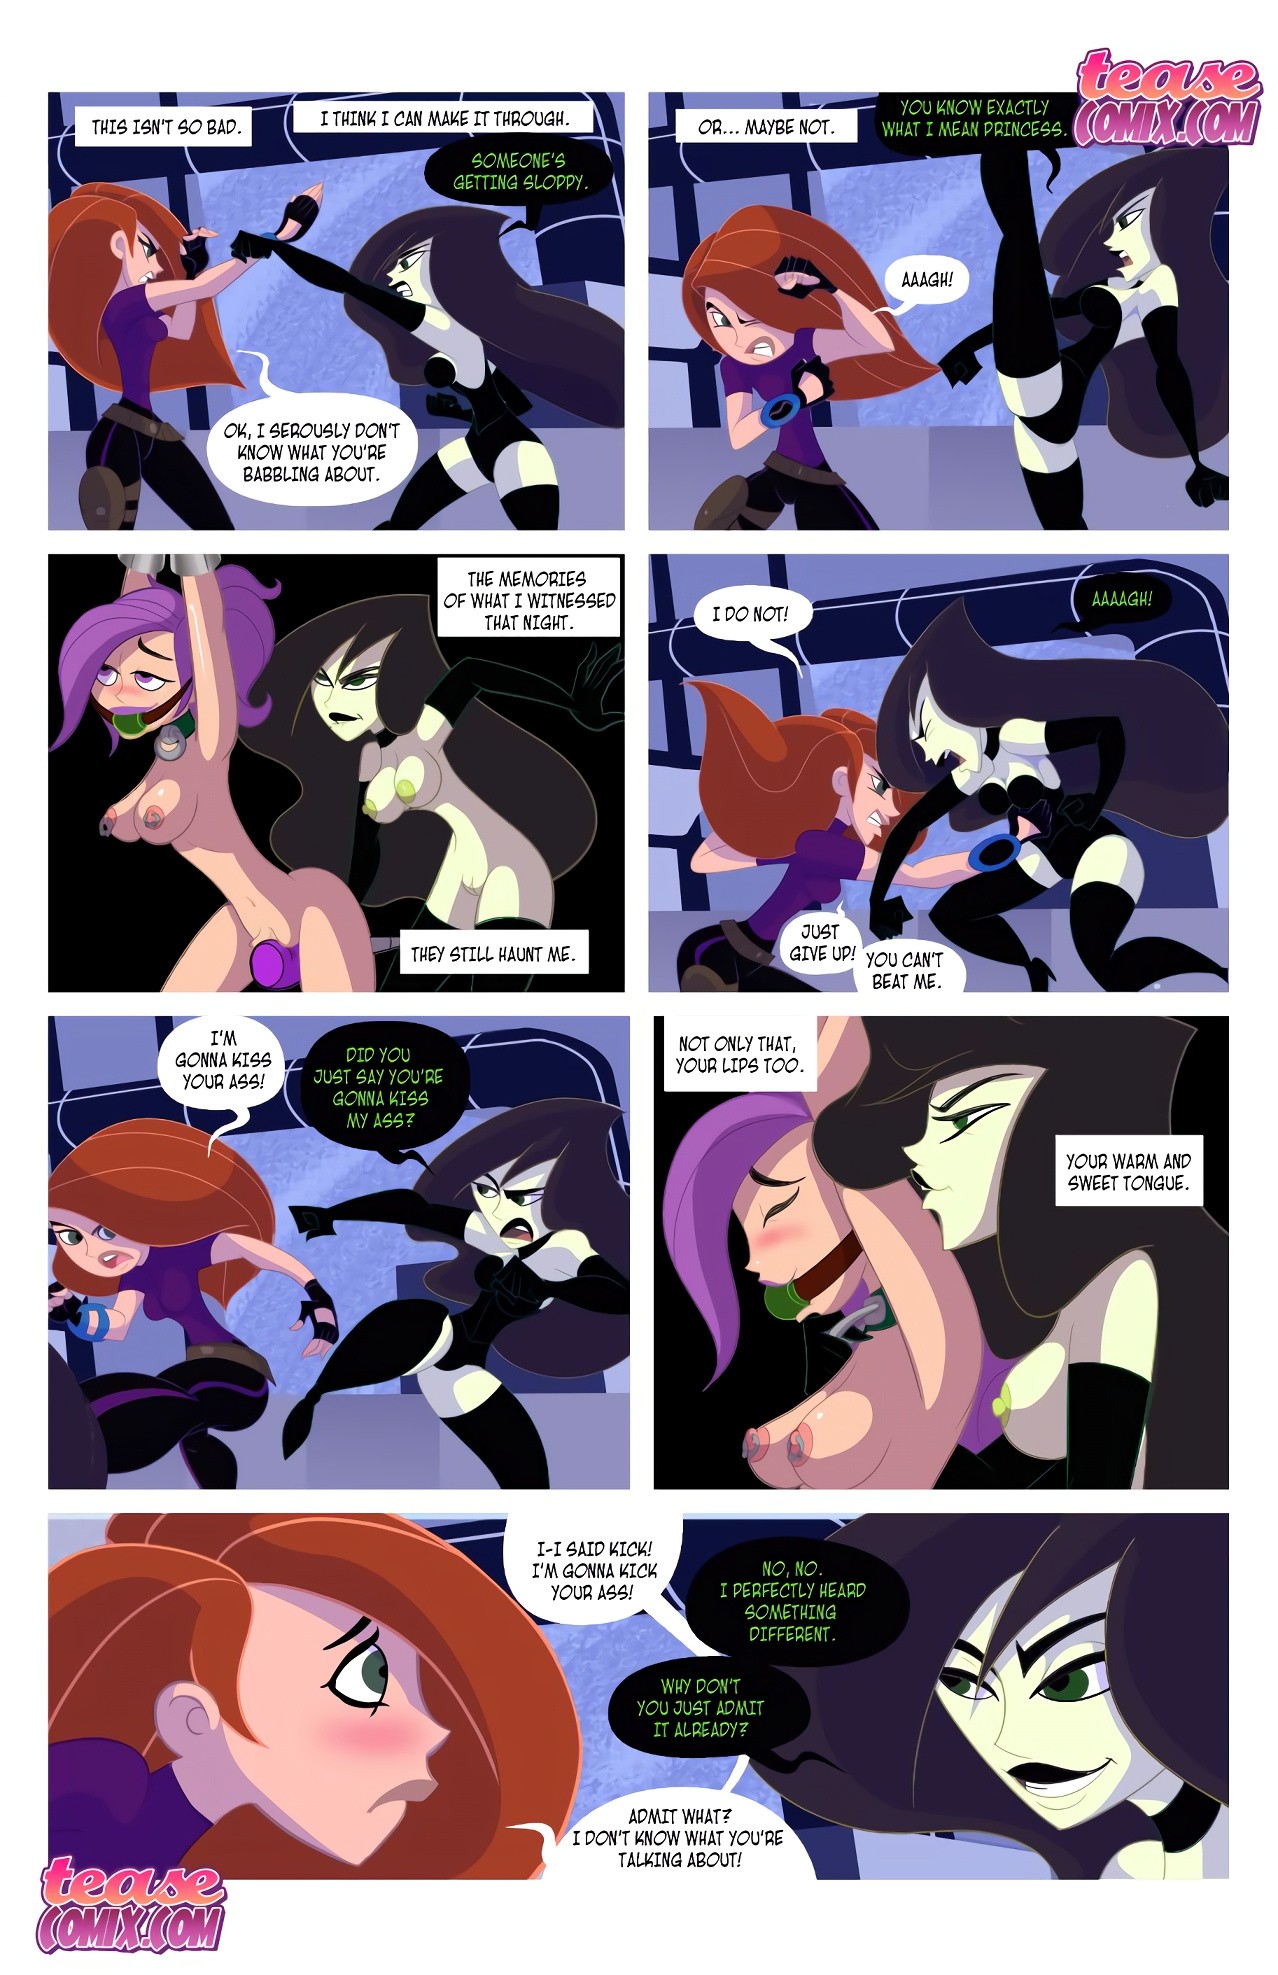 Kinky Possible - A Villain's Bitch Remastered 2 porn comic picture 4